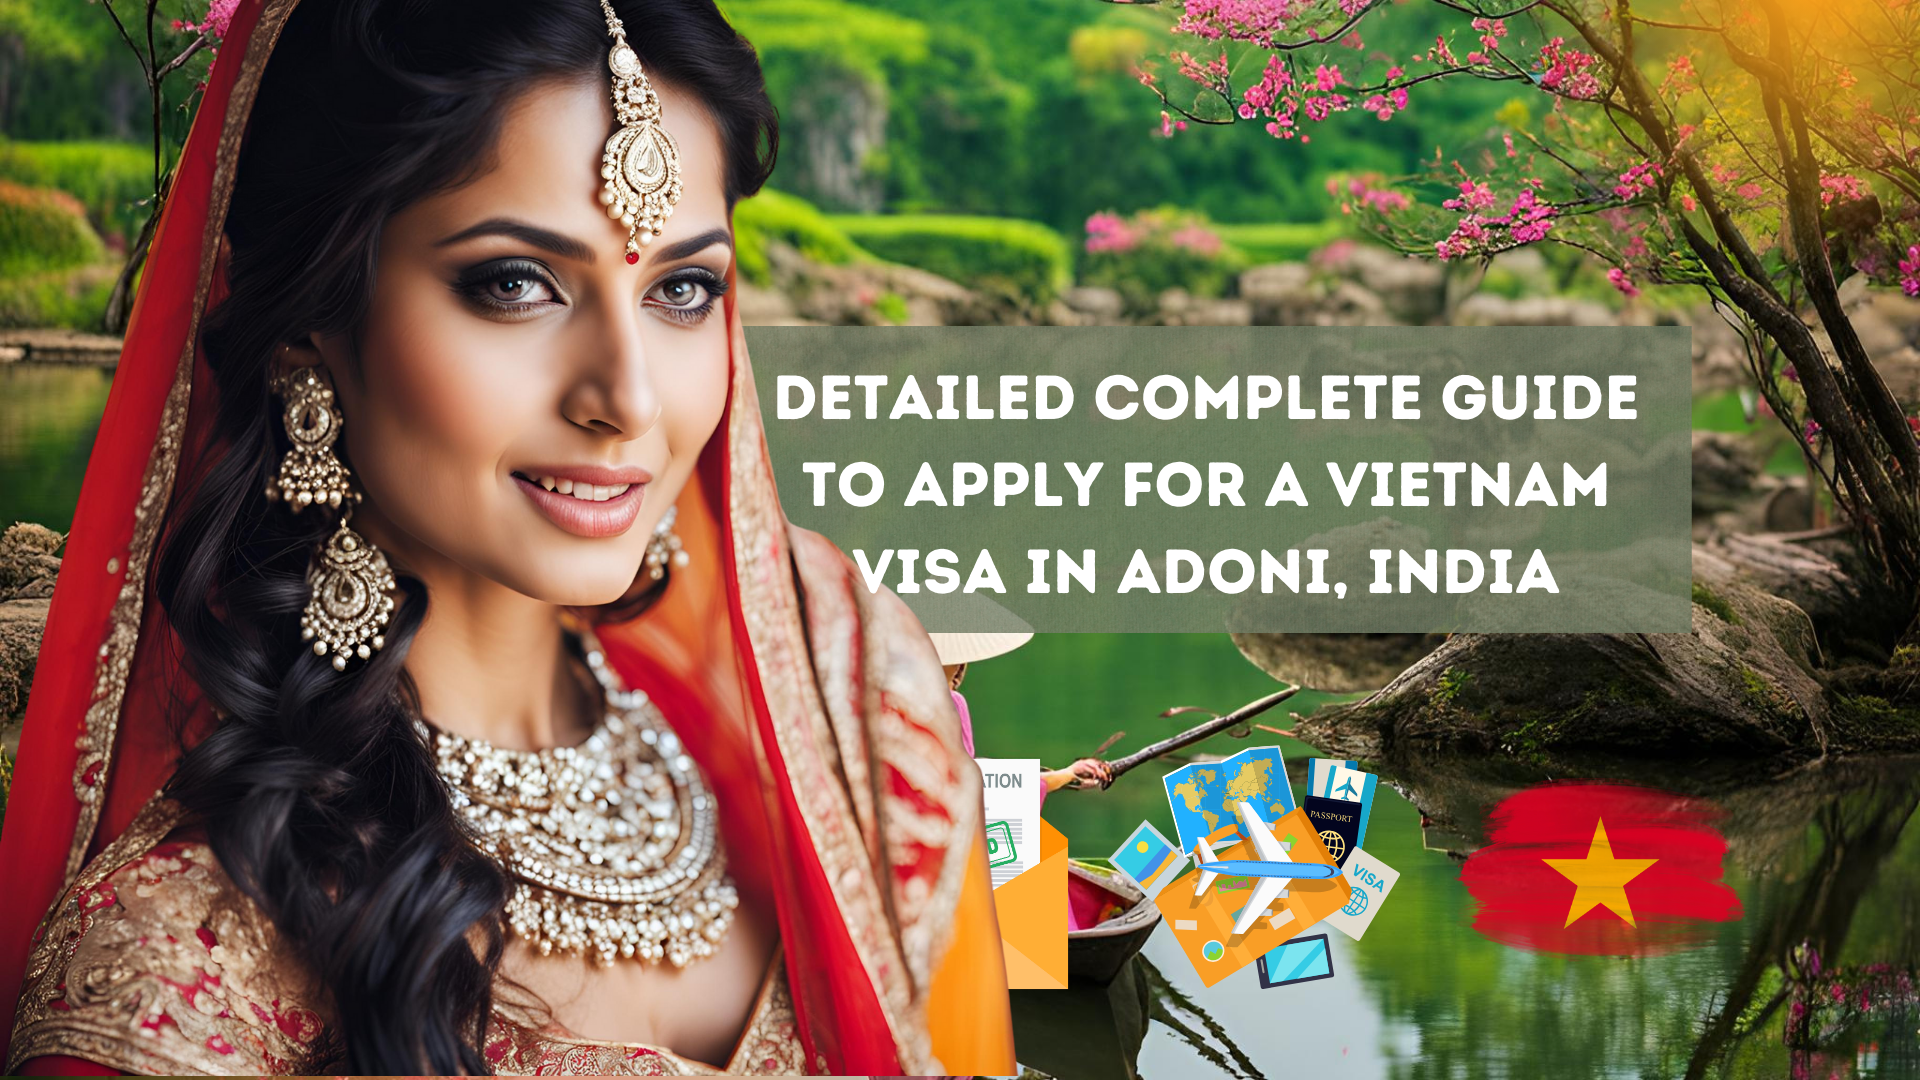 Detailed Complete Guide to Apply for a Vietnam Visa in Adoni, India